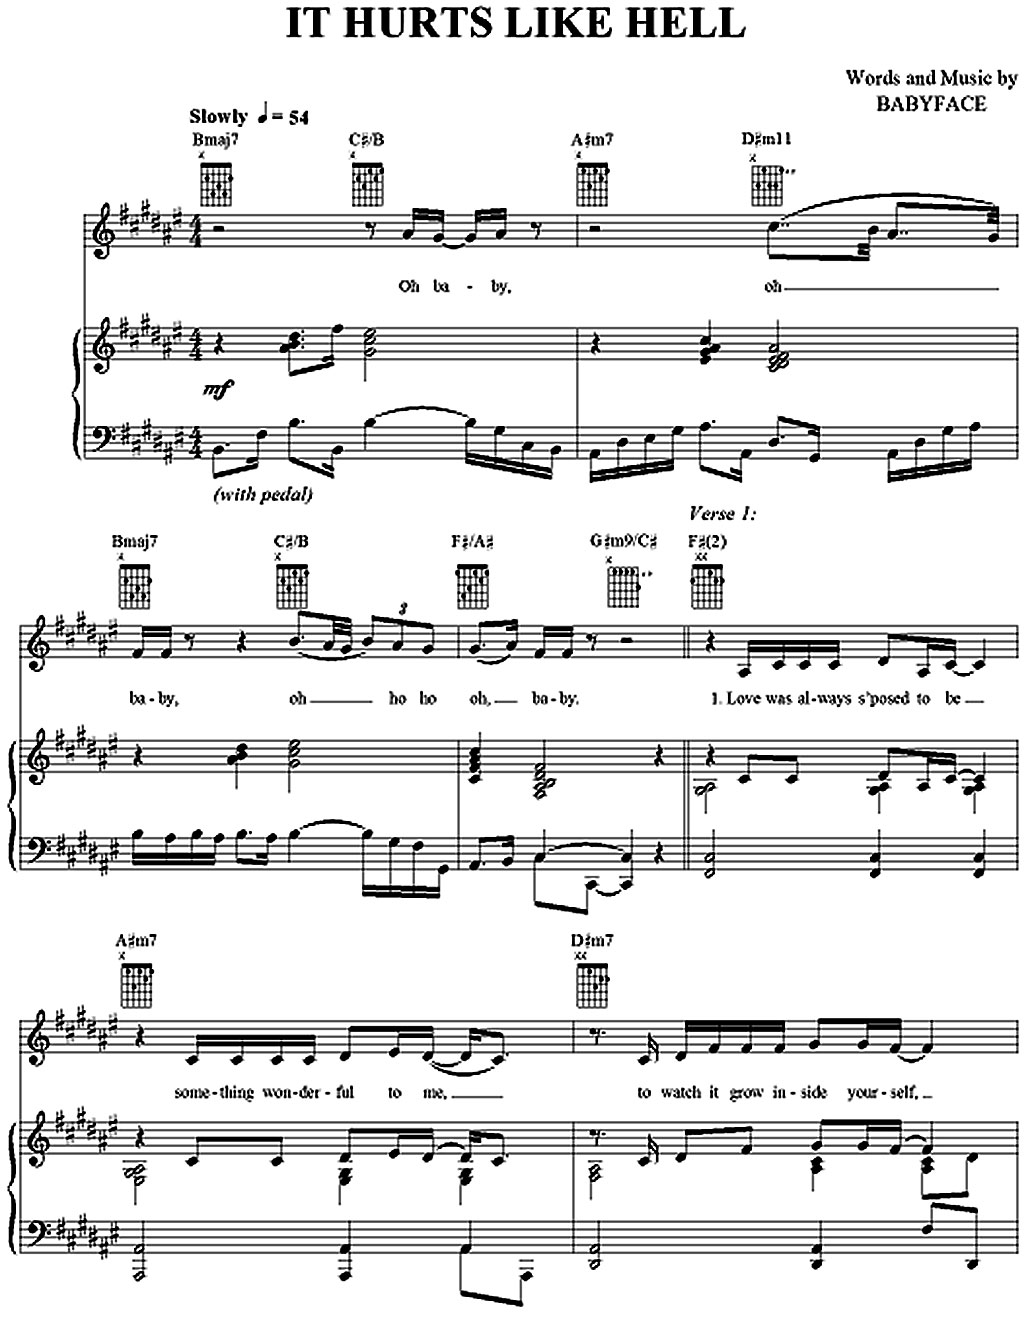 It hurts like hell sheet music notes